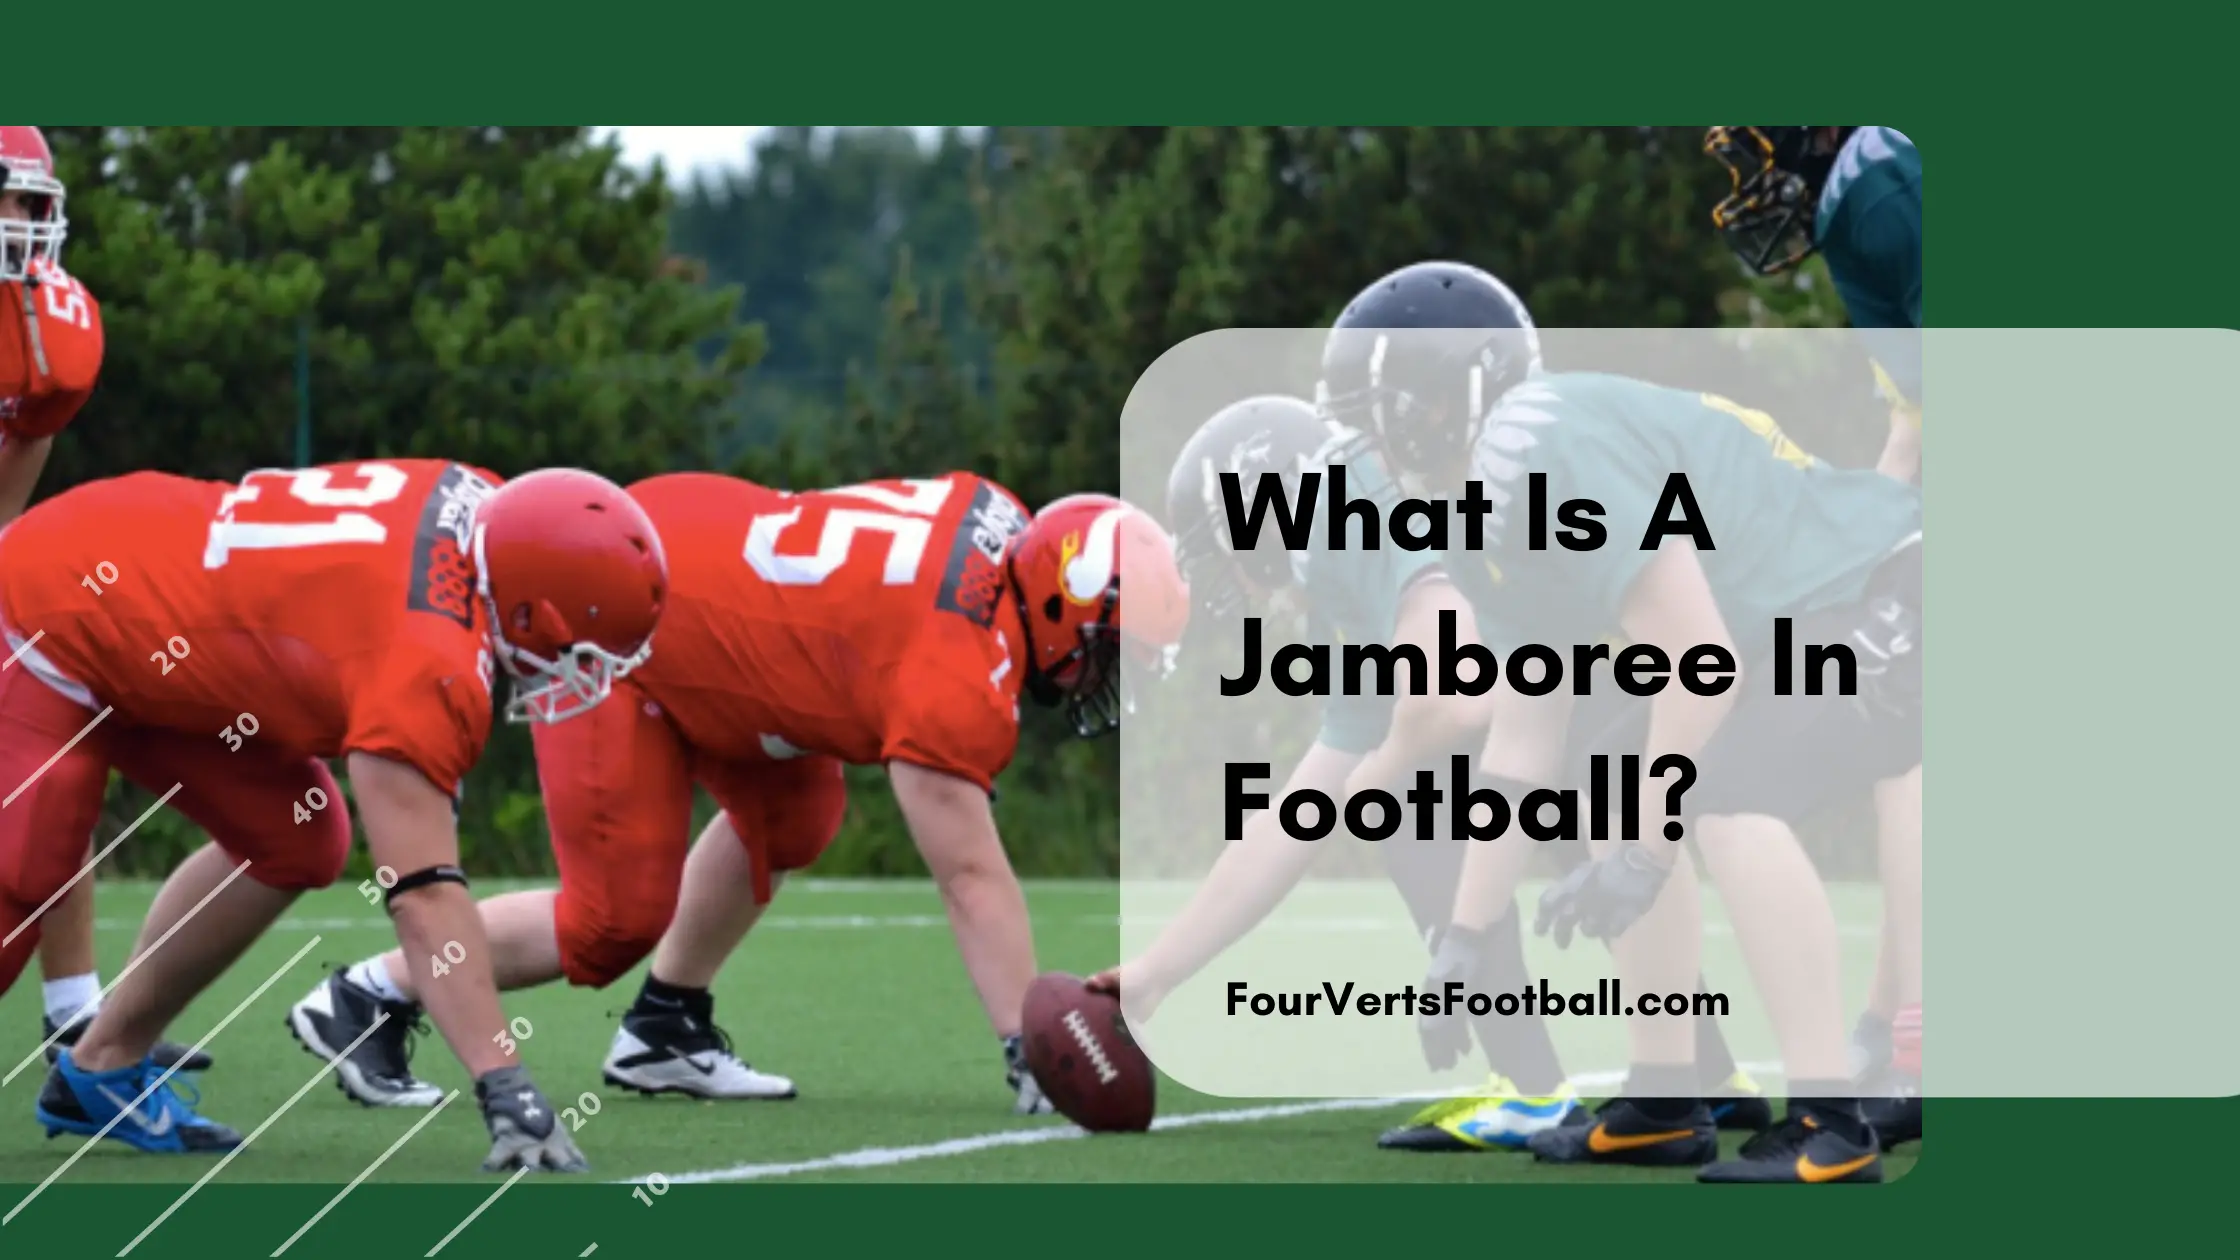 What Is A Jamboree In Football